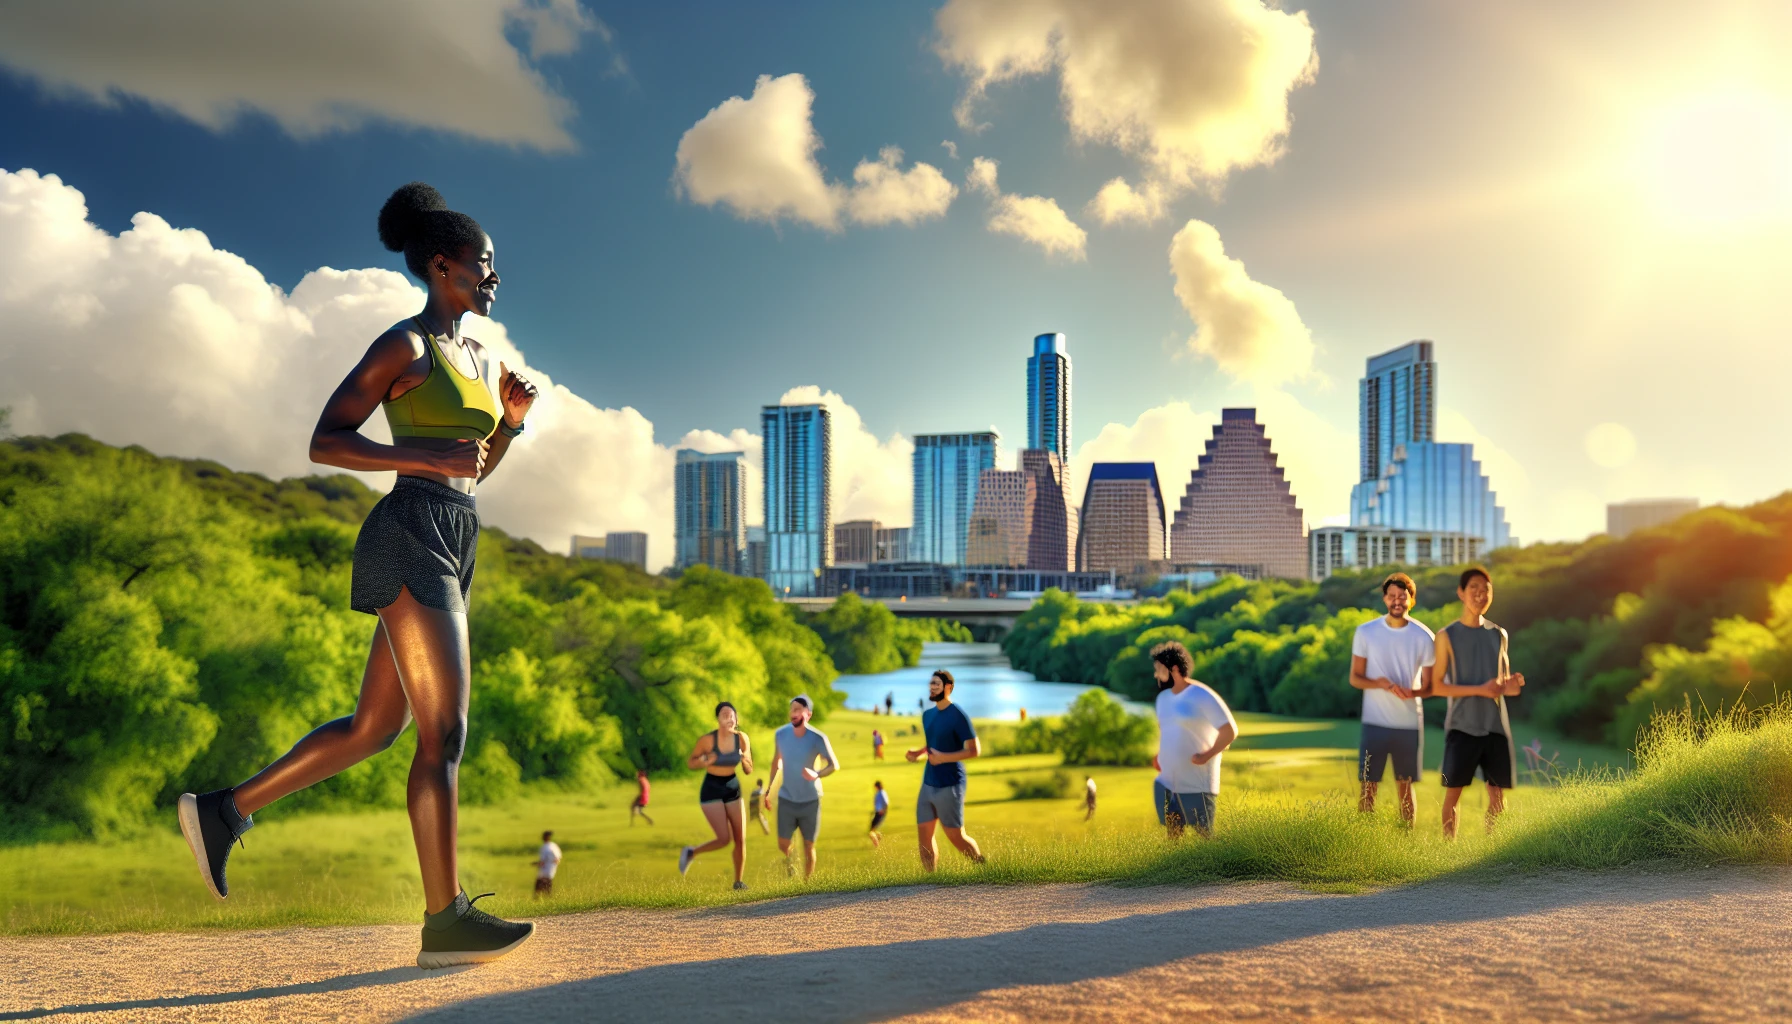 Scenic view of Austin's outdoor activities and green spaces - The truth about moving in Austin local insights and honest reviews